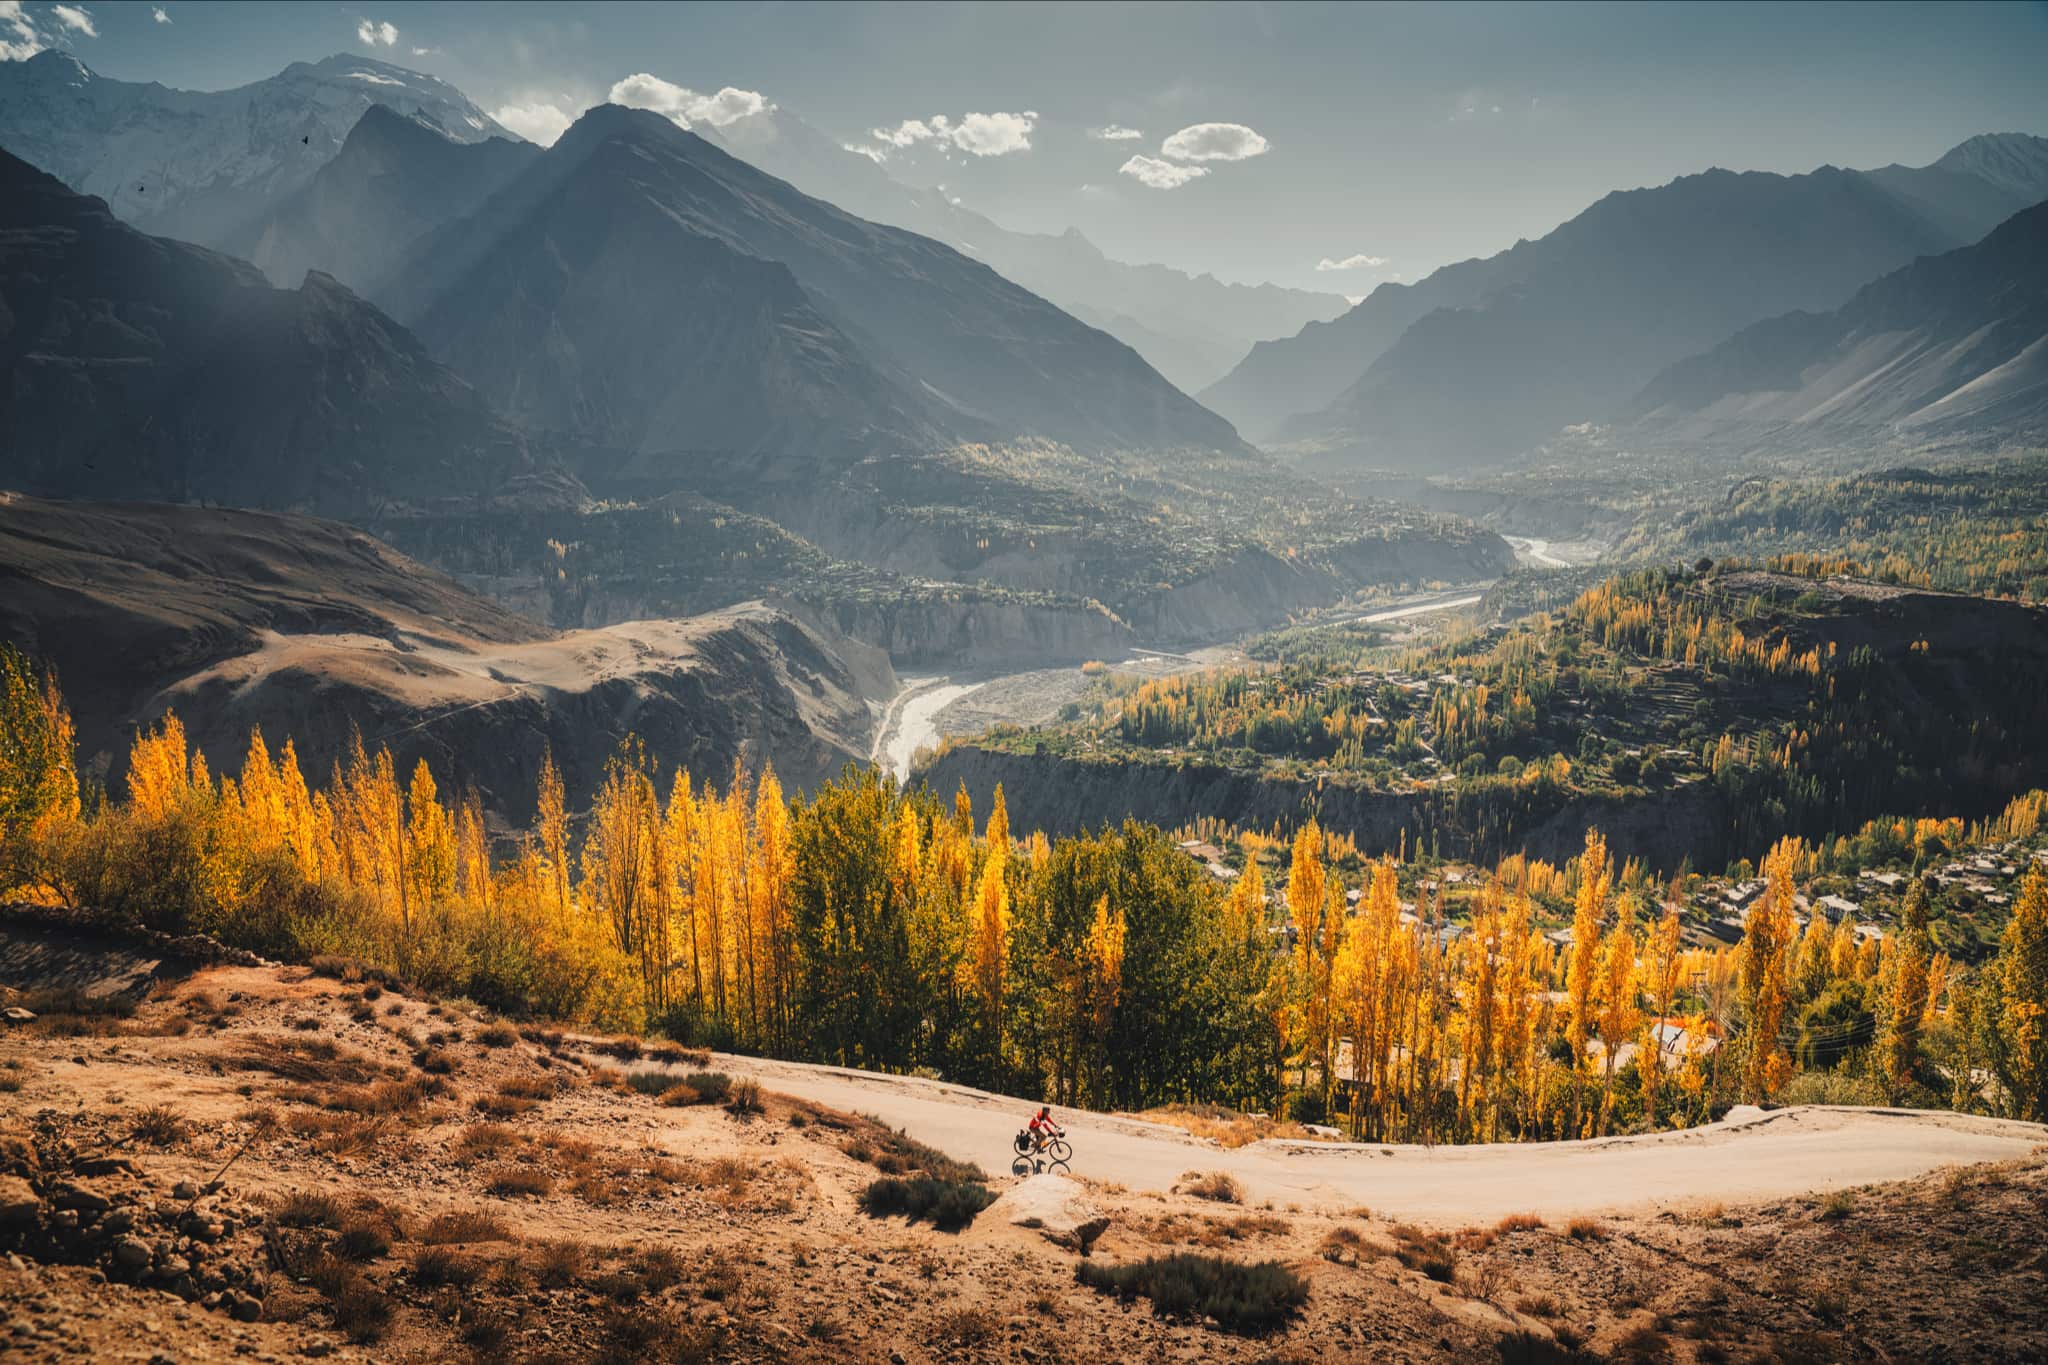 Landscape with mountains and trees with yellow leaves and in the distance Kamran Ali riding a belt driven bike